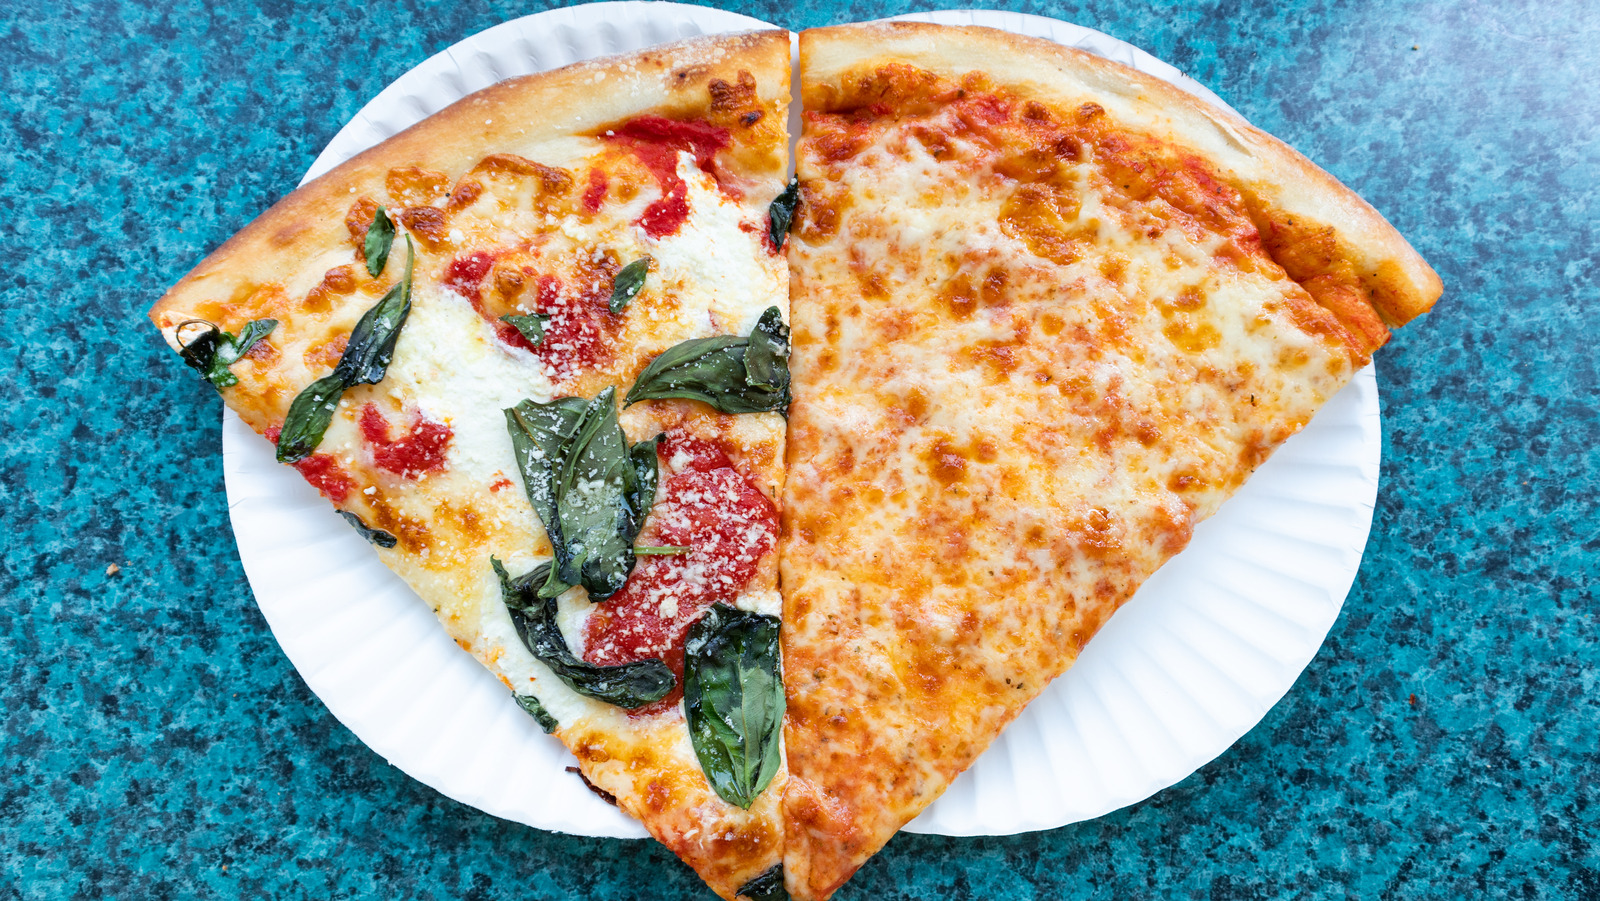 New York's tap water has nothing to do with the quality of its pizza